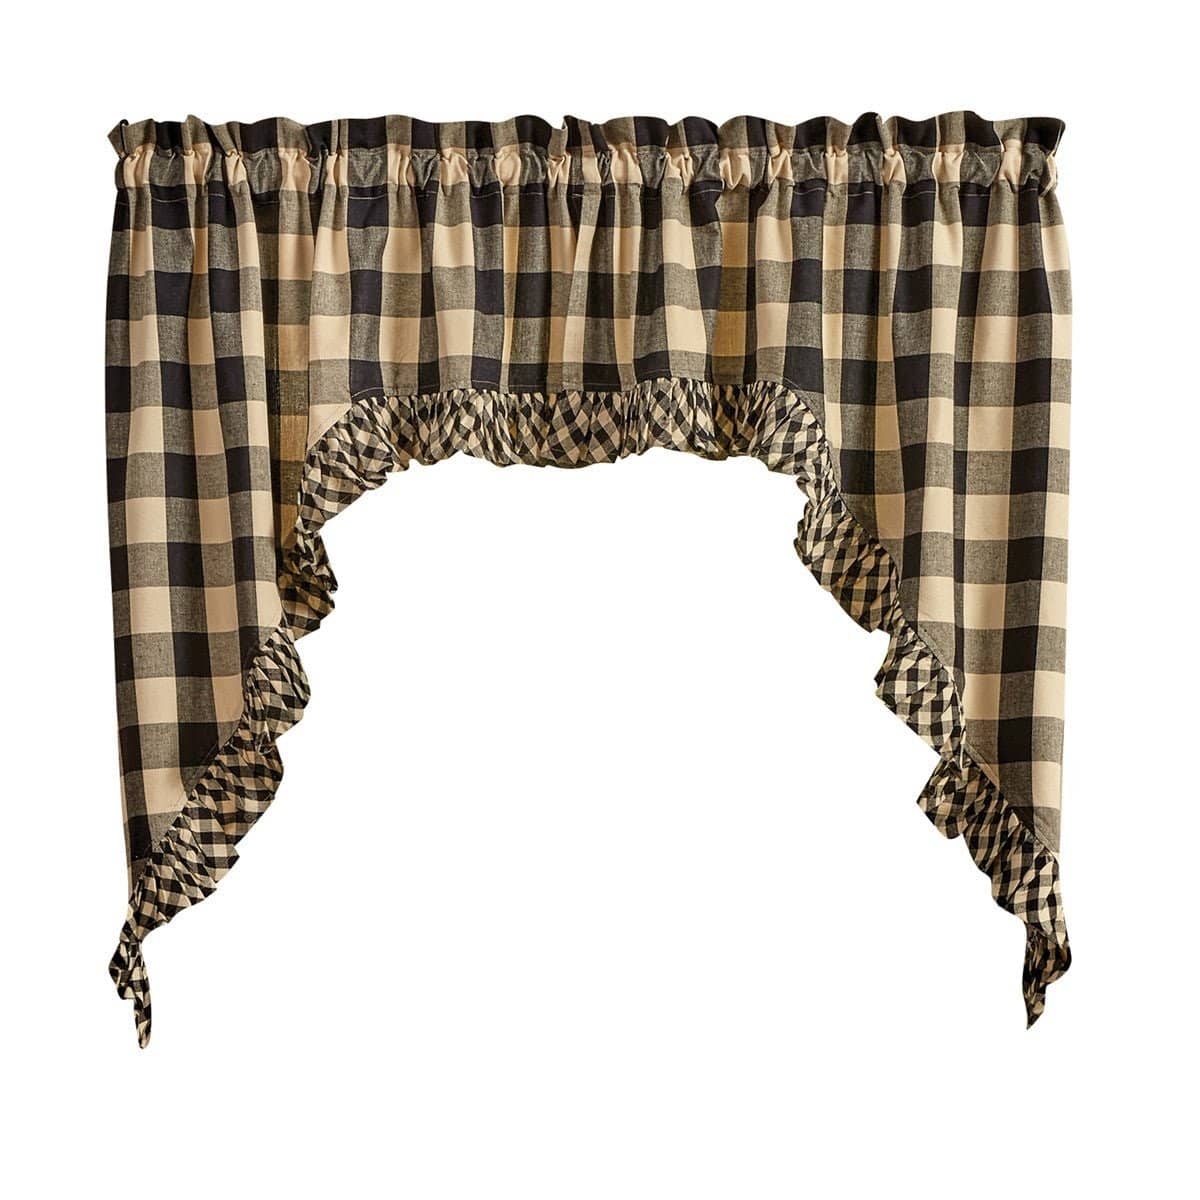 Wicklow Check in Black Ruffled Swag Pair 36" Long Unlined-Park Designs-The Village Merchant